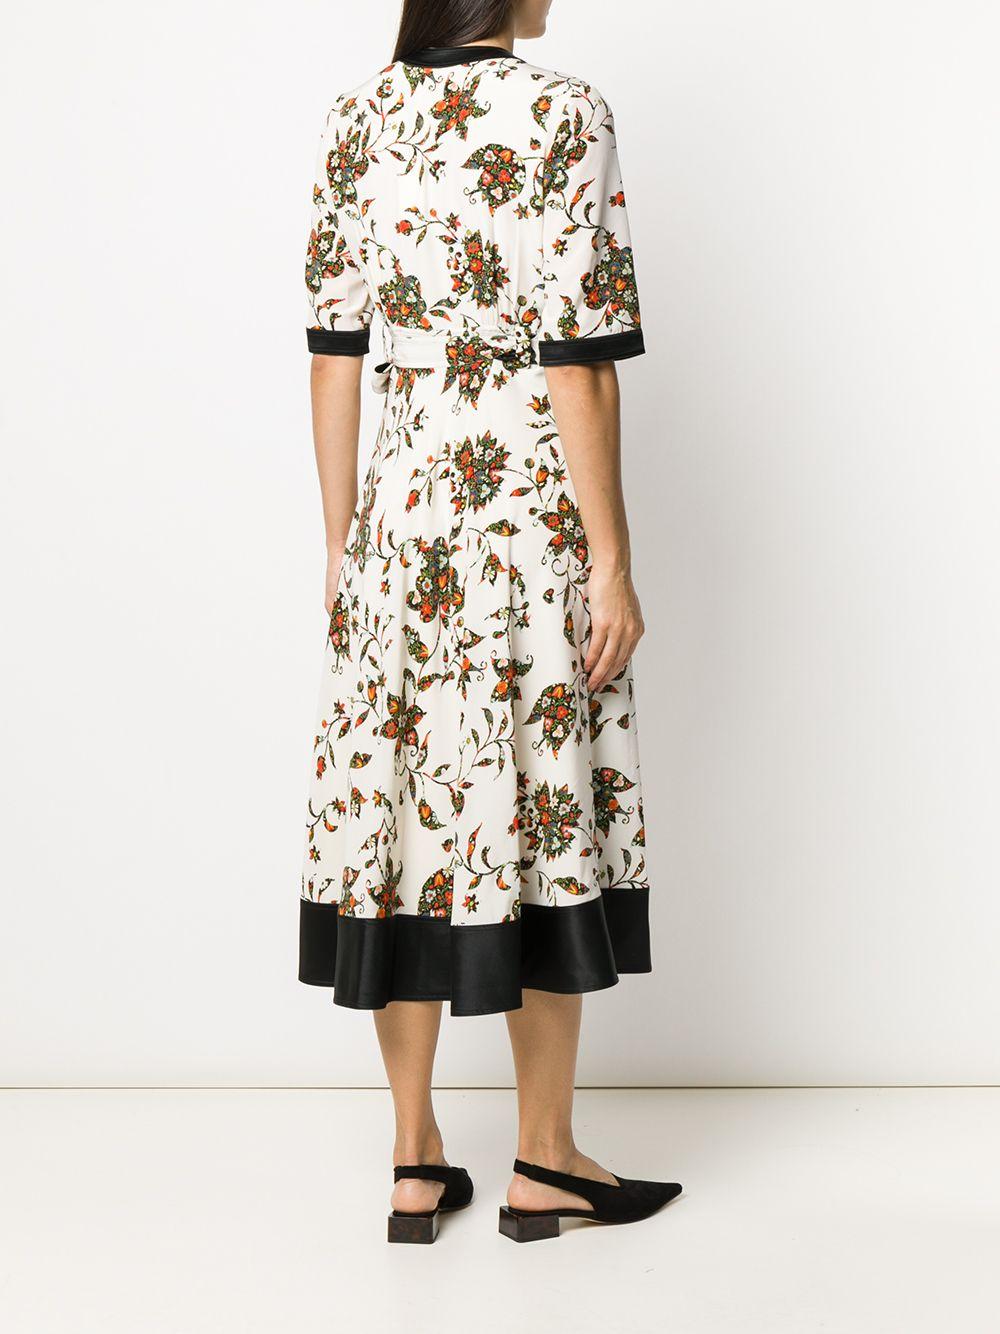 Tory Burch Wrap Floral Dress in White - Lyst